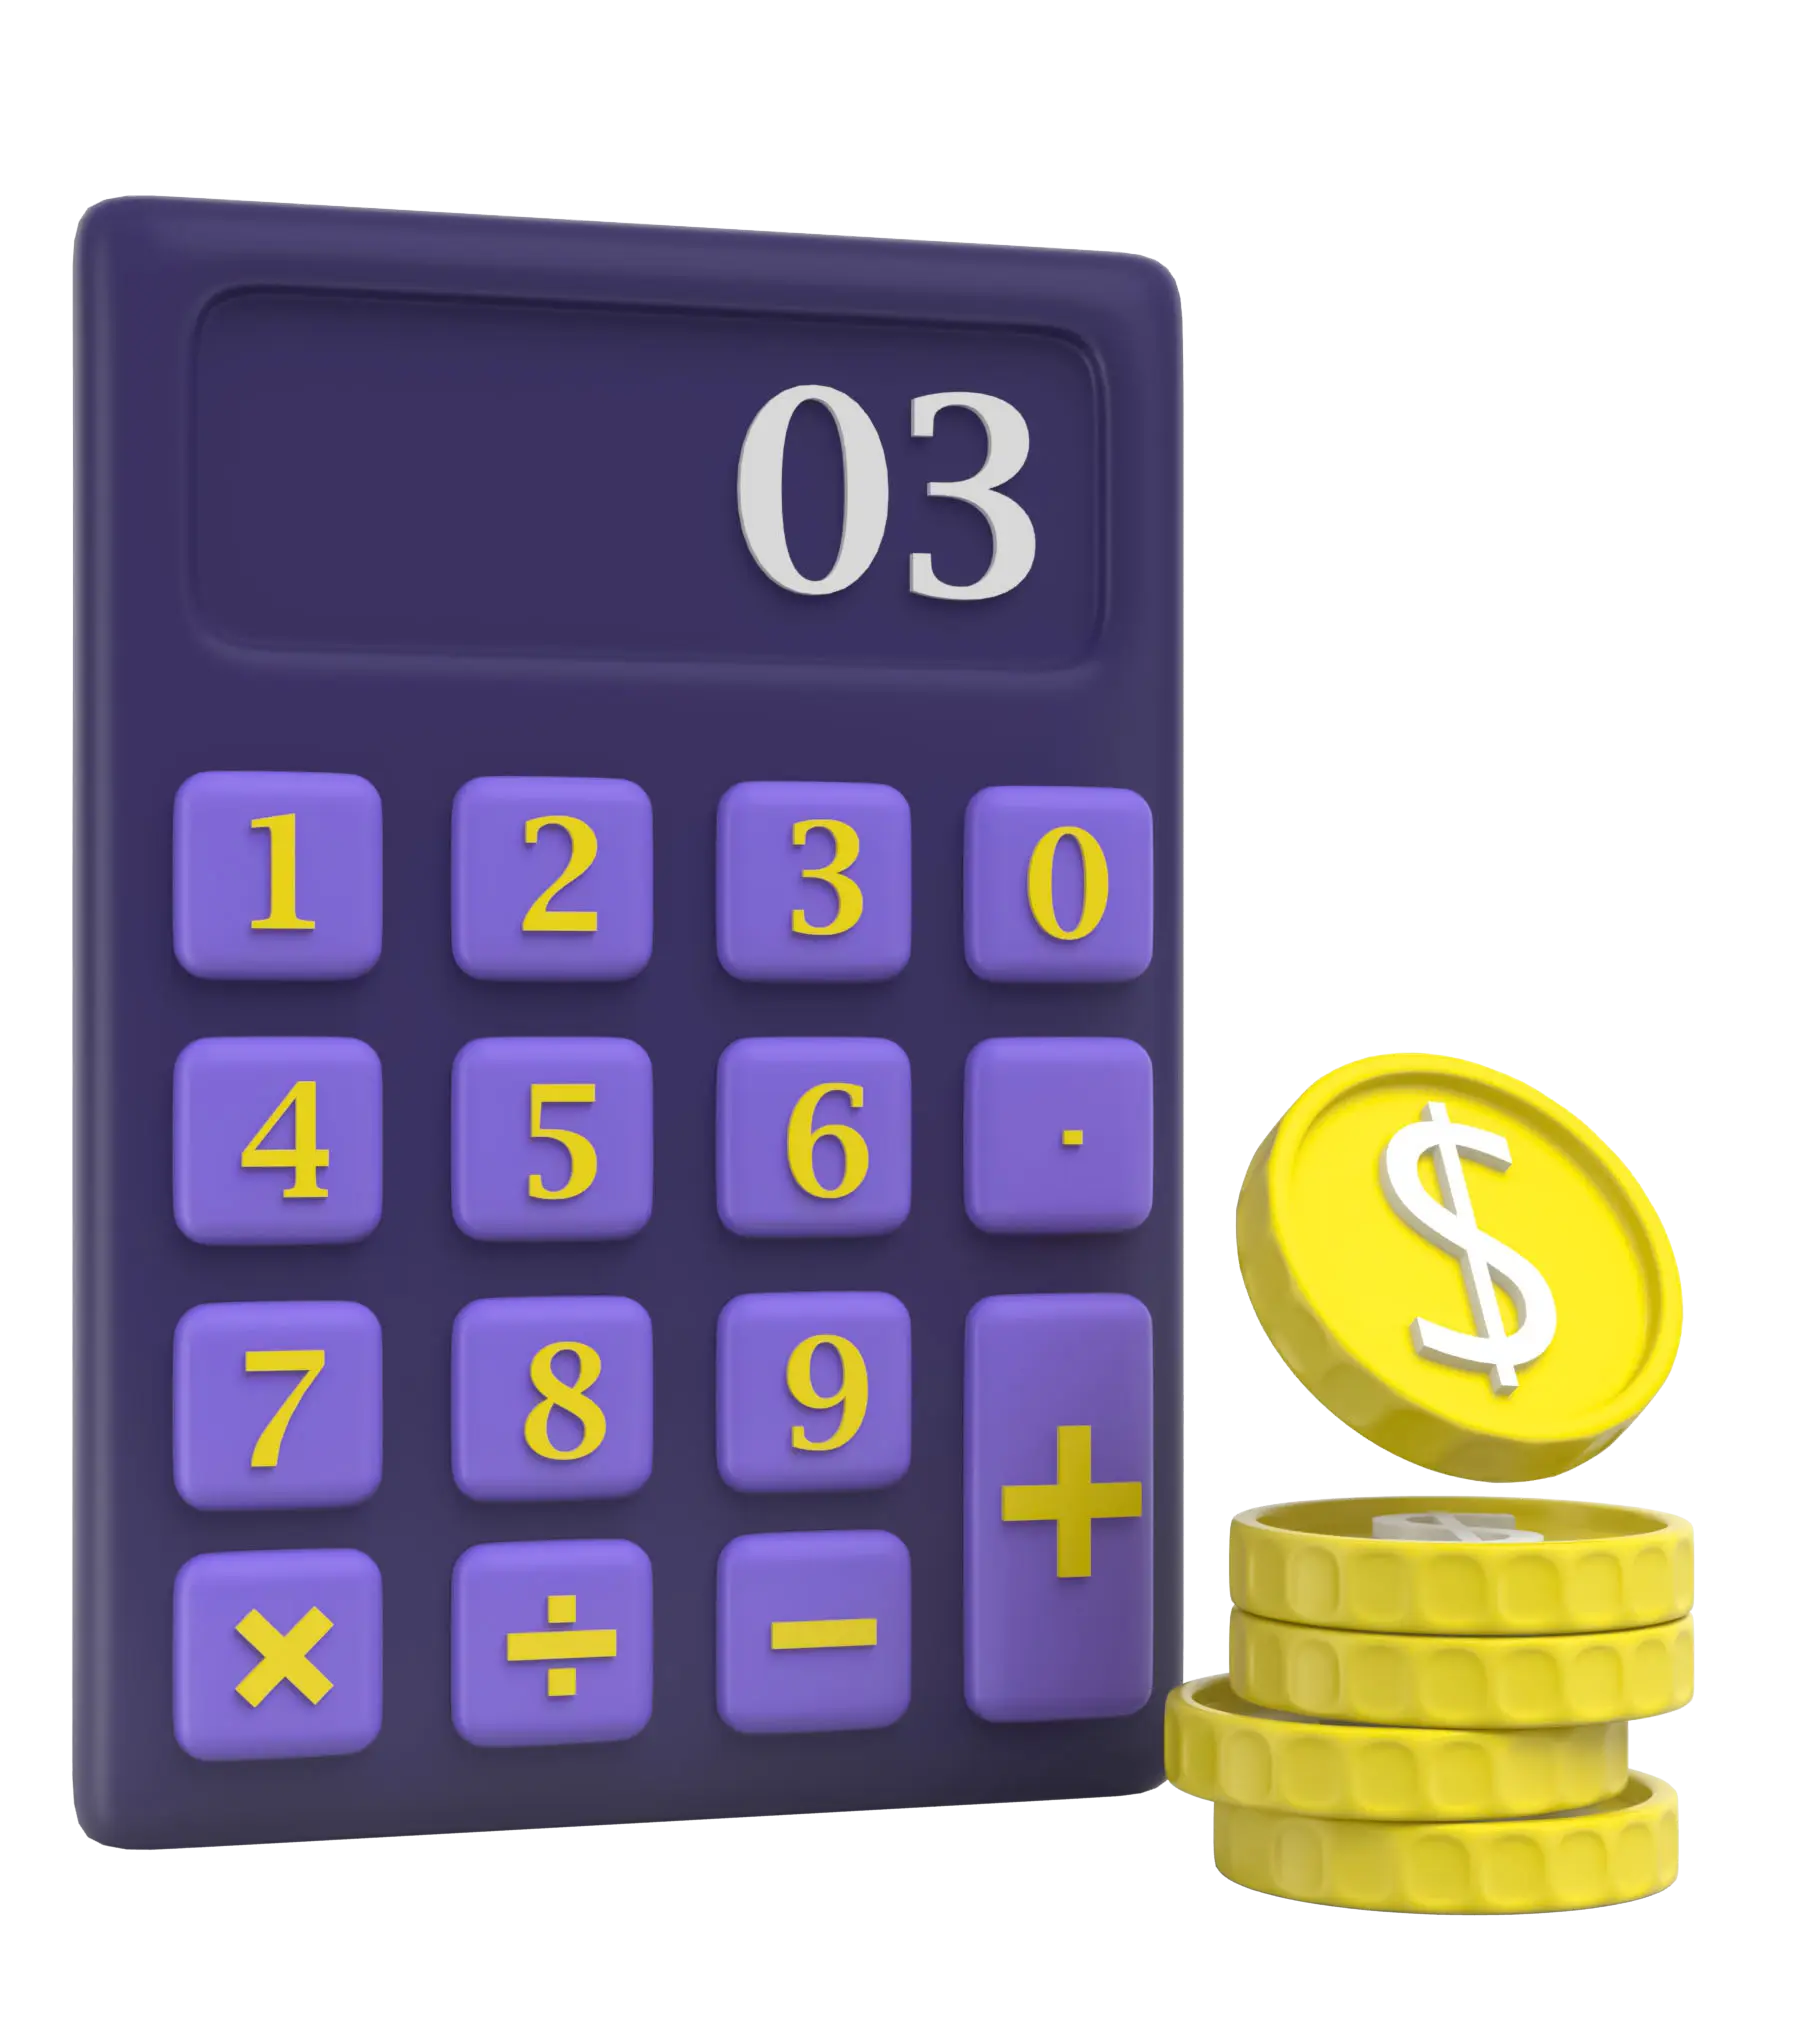 A calculator and coins with a dollar sign, representing tip calculations.